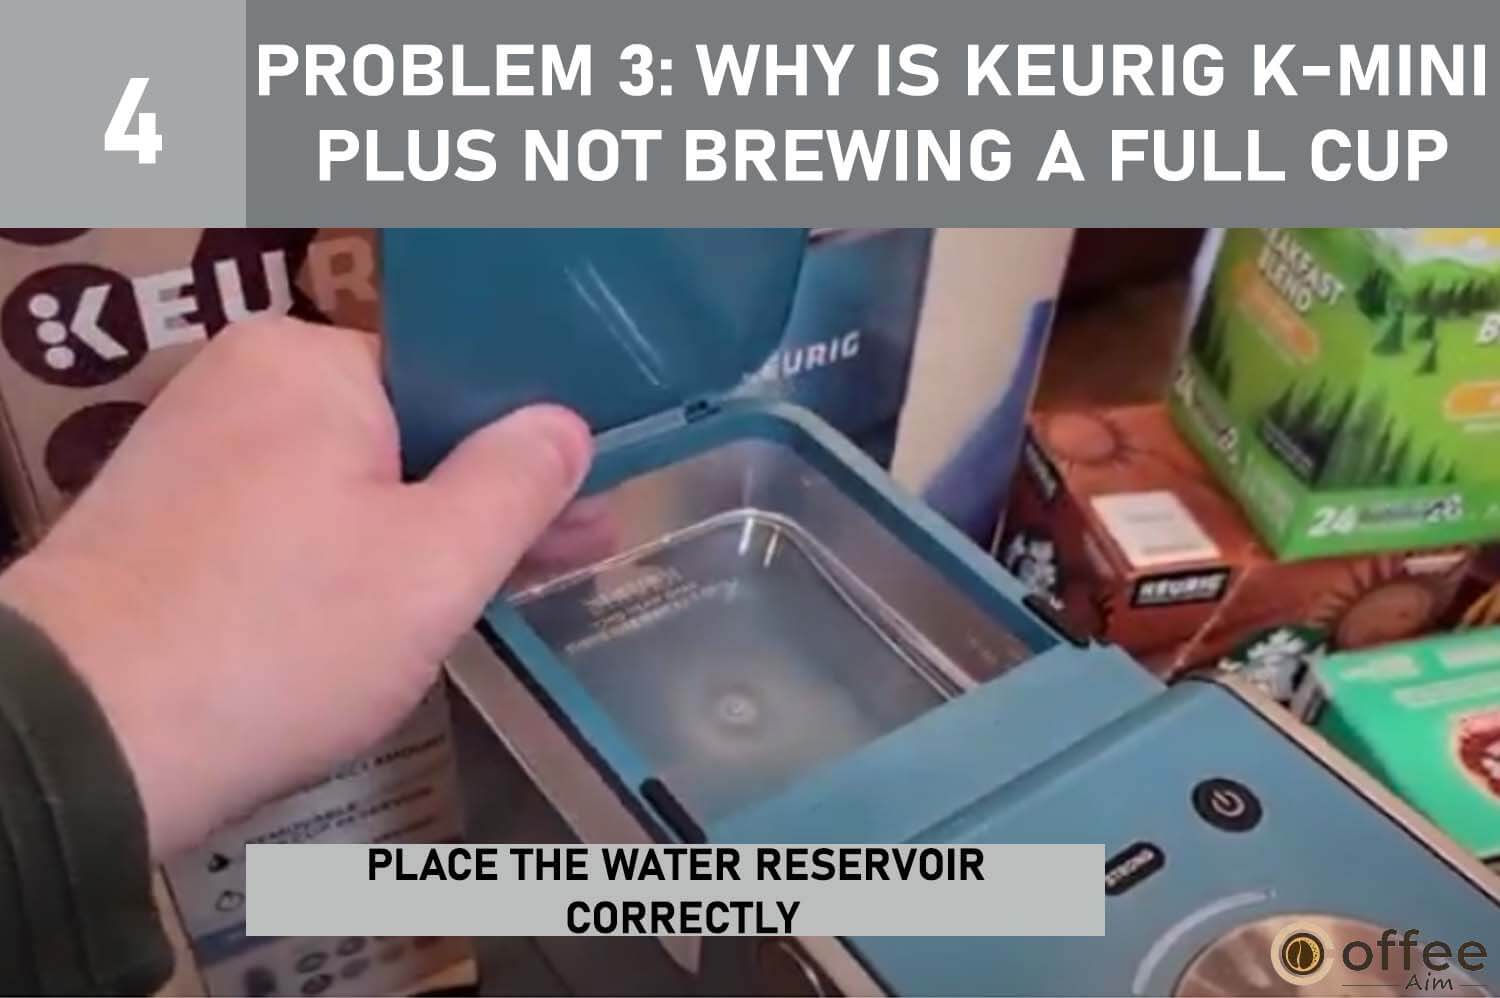 This image demonstrates the correct placement of the Water Reservoir, addressing Problem 3: Why the Keurig K-Mini Plus is Not Brewing a Full Cup? in our "Keurig K-Mini Plus Problems" article.




